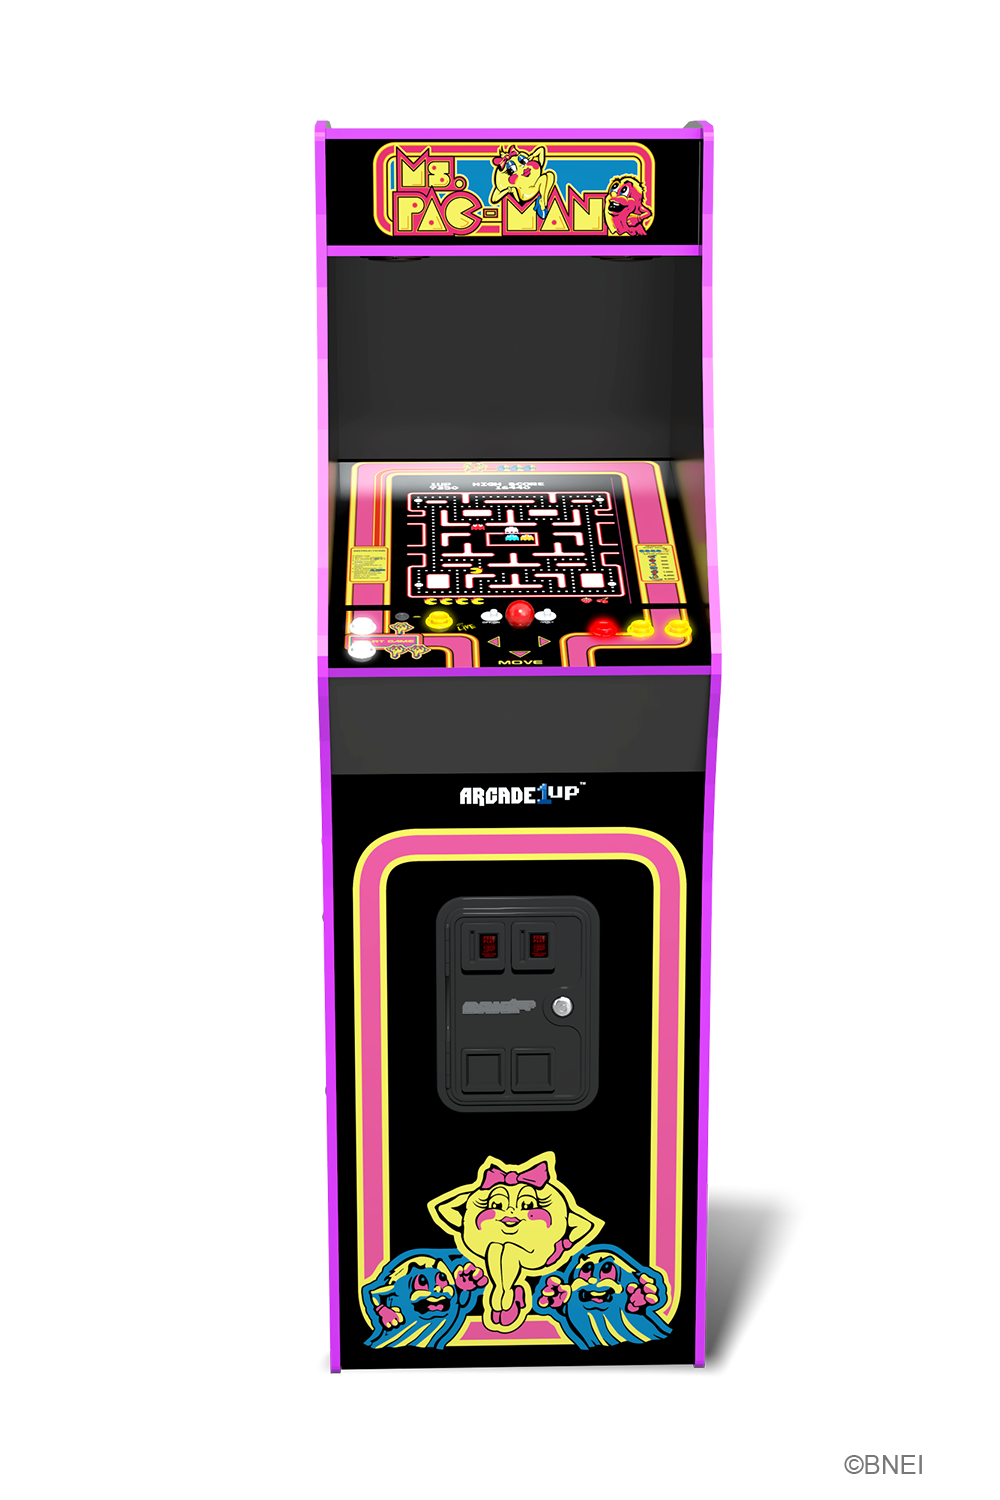 Ms. PAC-MAN Deluxe